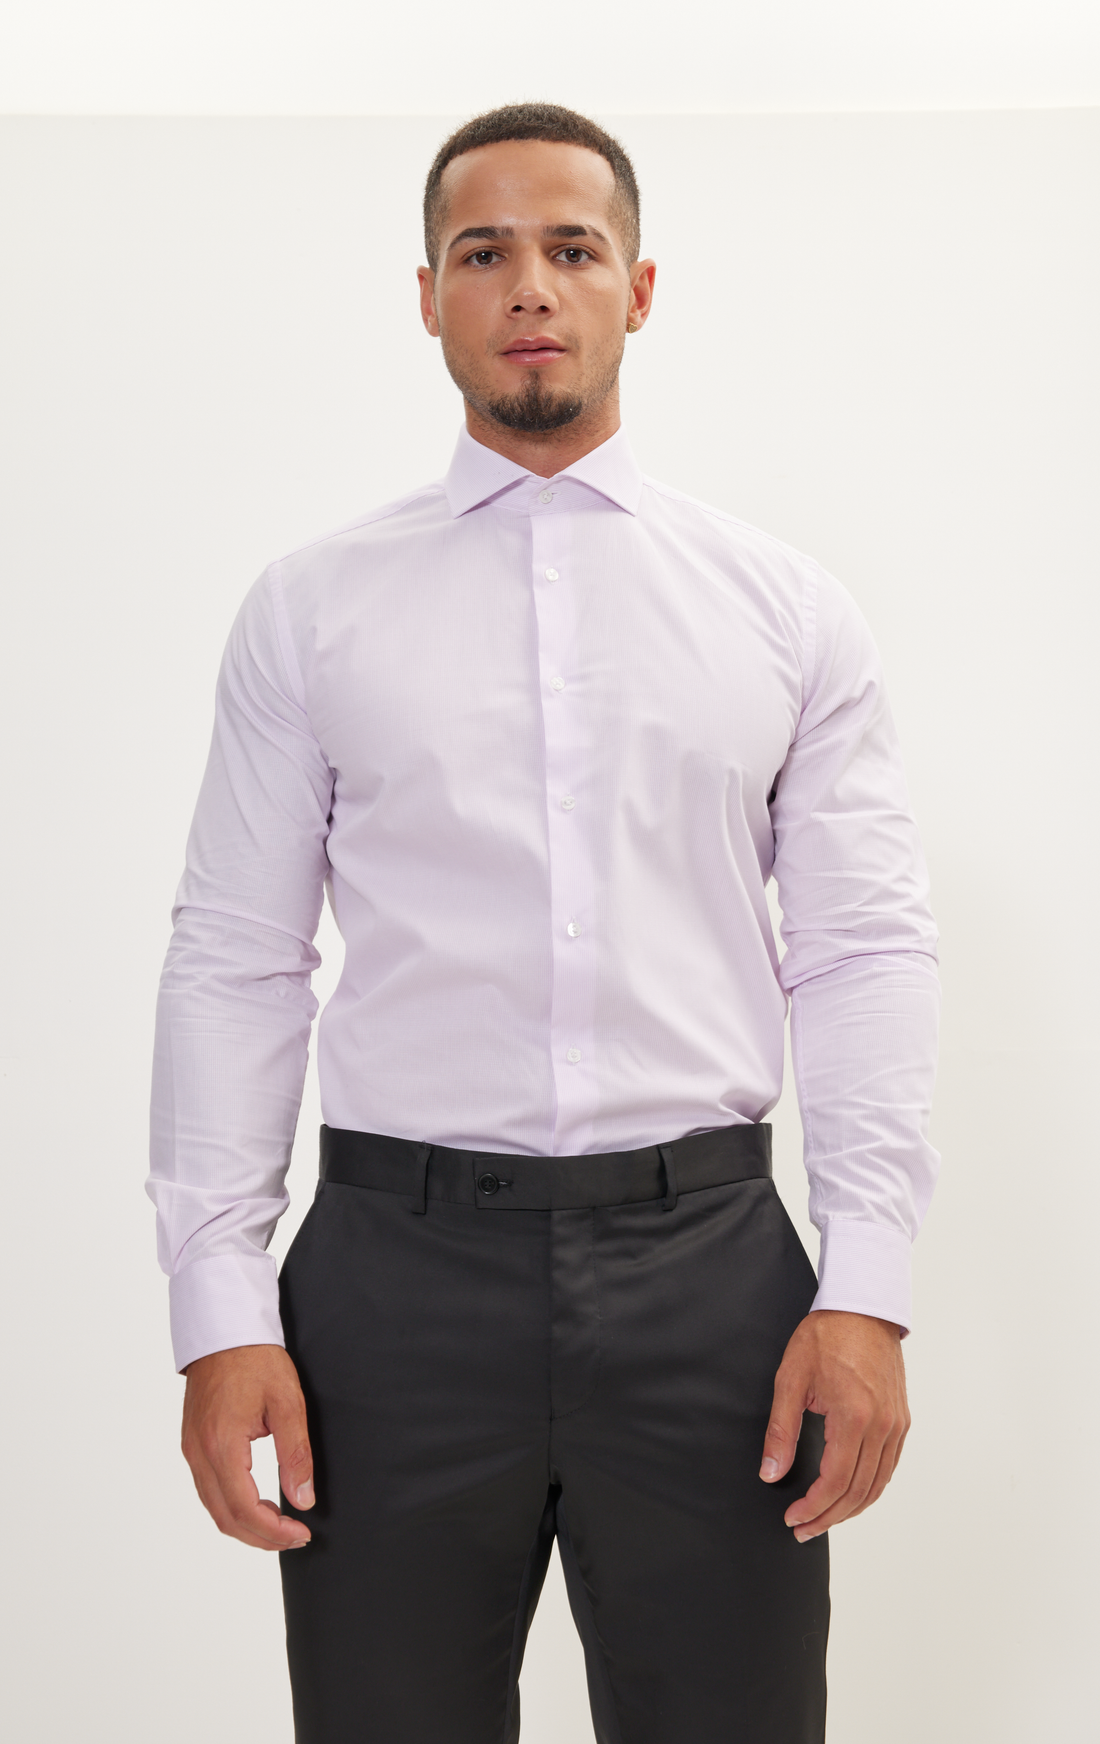 N° AN4902 PURE COTTON FRENCH PLACKET SPREAD COLLAR DRESS SHIRT - WHITE PINK TWILL